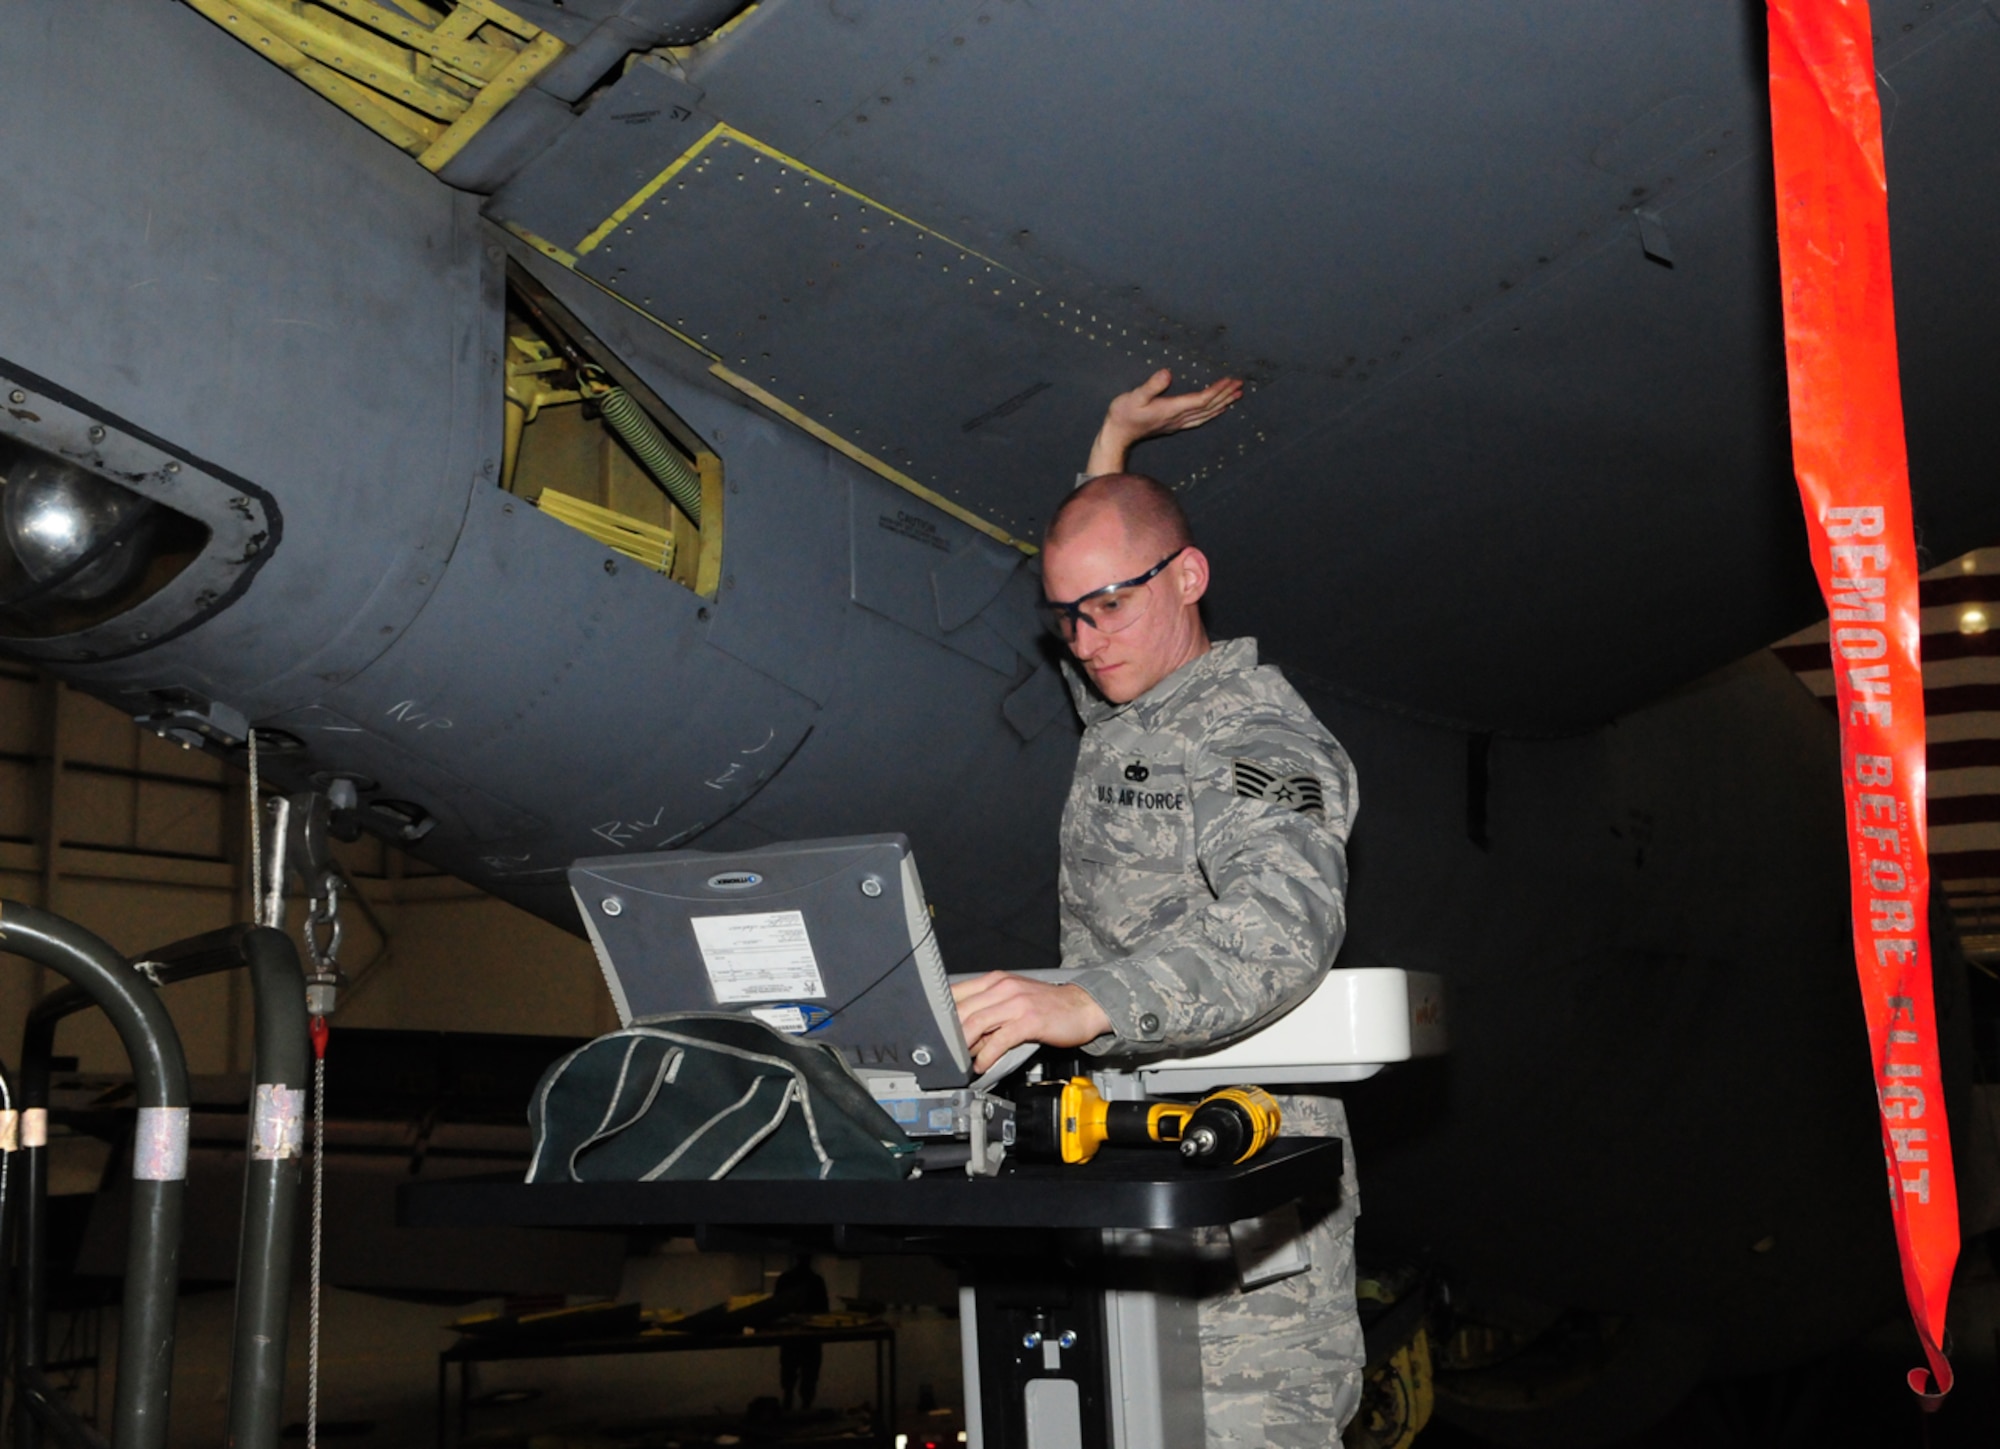 Staff Sgt. Christopher Klaus, 100th Maintenance Squadron ISO dock controller, installs a coffin panel on the bottom of the horizontal stabilixer near the boom area of a KC-135 Stratotanker Dec. 9, 2009. Sergeant Klaus was a major player in the team who put together the AFSO 21 intiative to get mobile maintenance platforms; he masterminded the research and purchase of the platforms. So far, using these stands has saved RAF Mildenhall hundreds of man-hours and many thousands of dollars. (U.S. Air Force photo by Karen Abeyasekere)